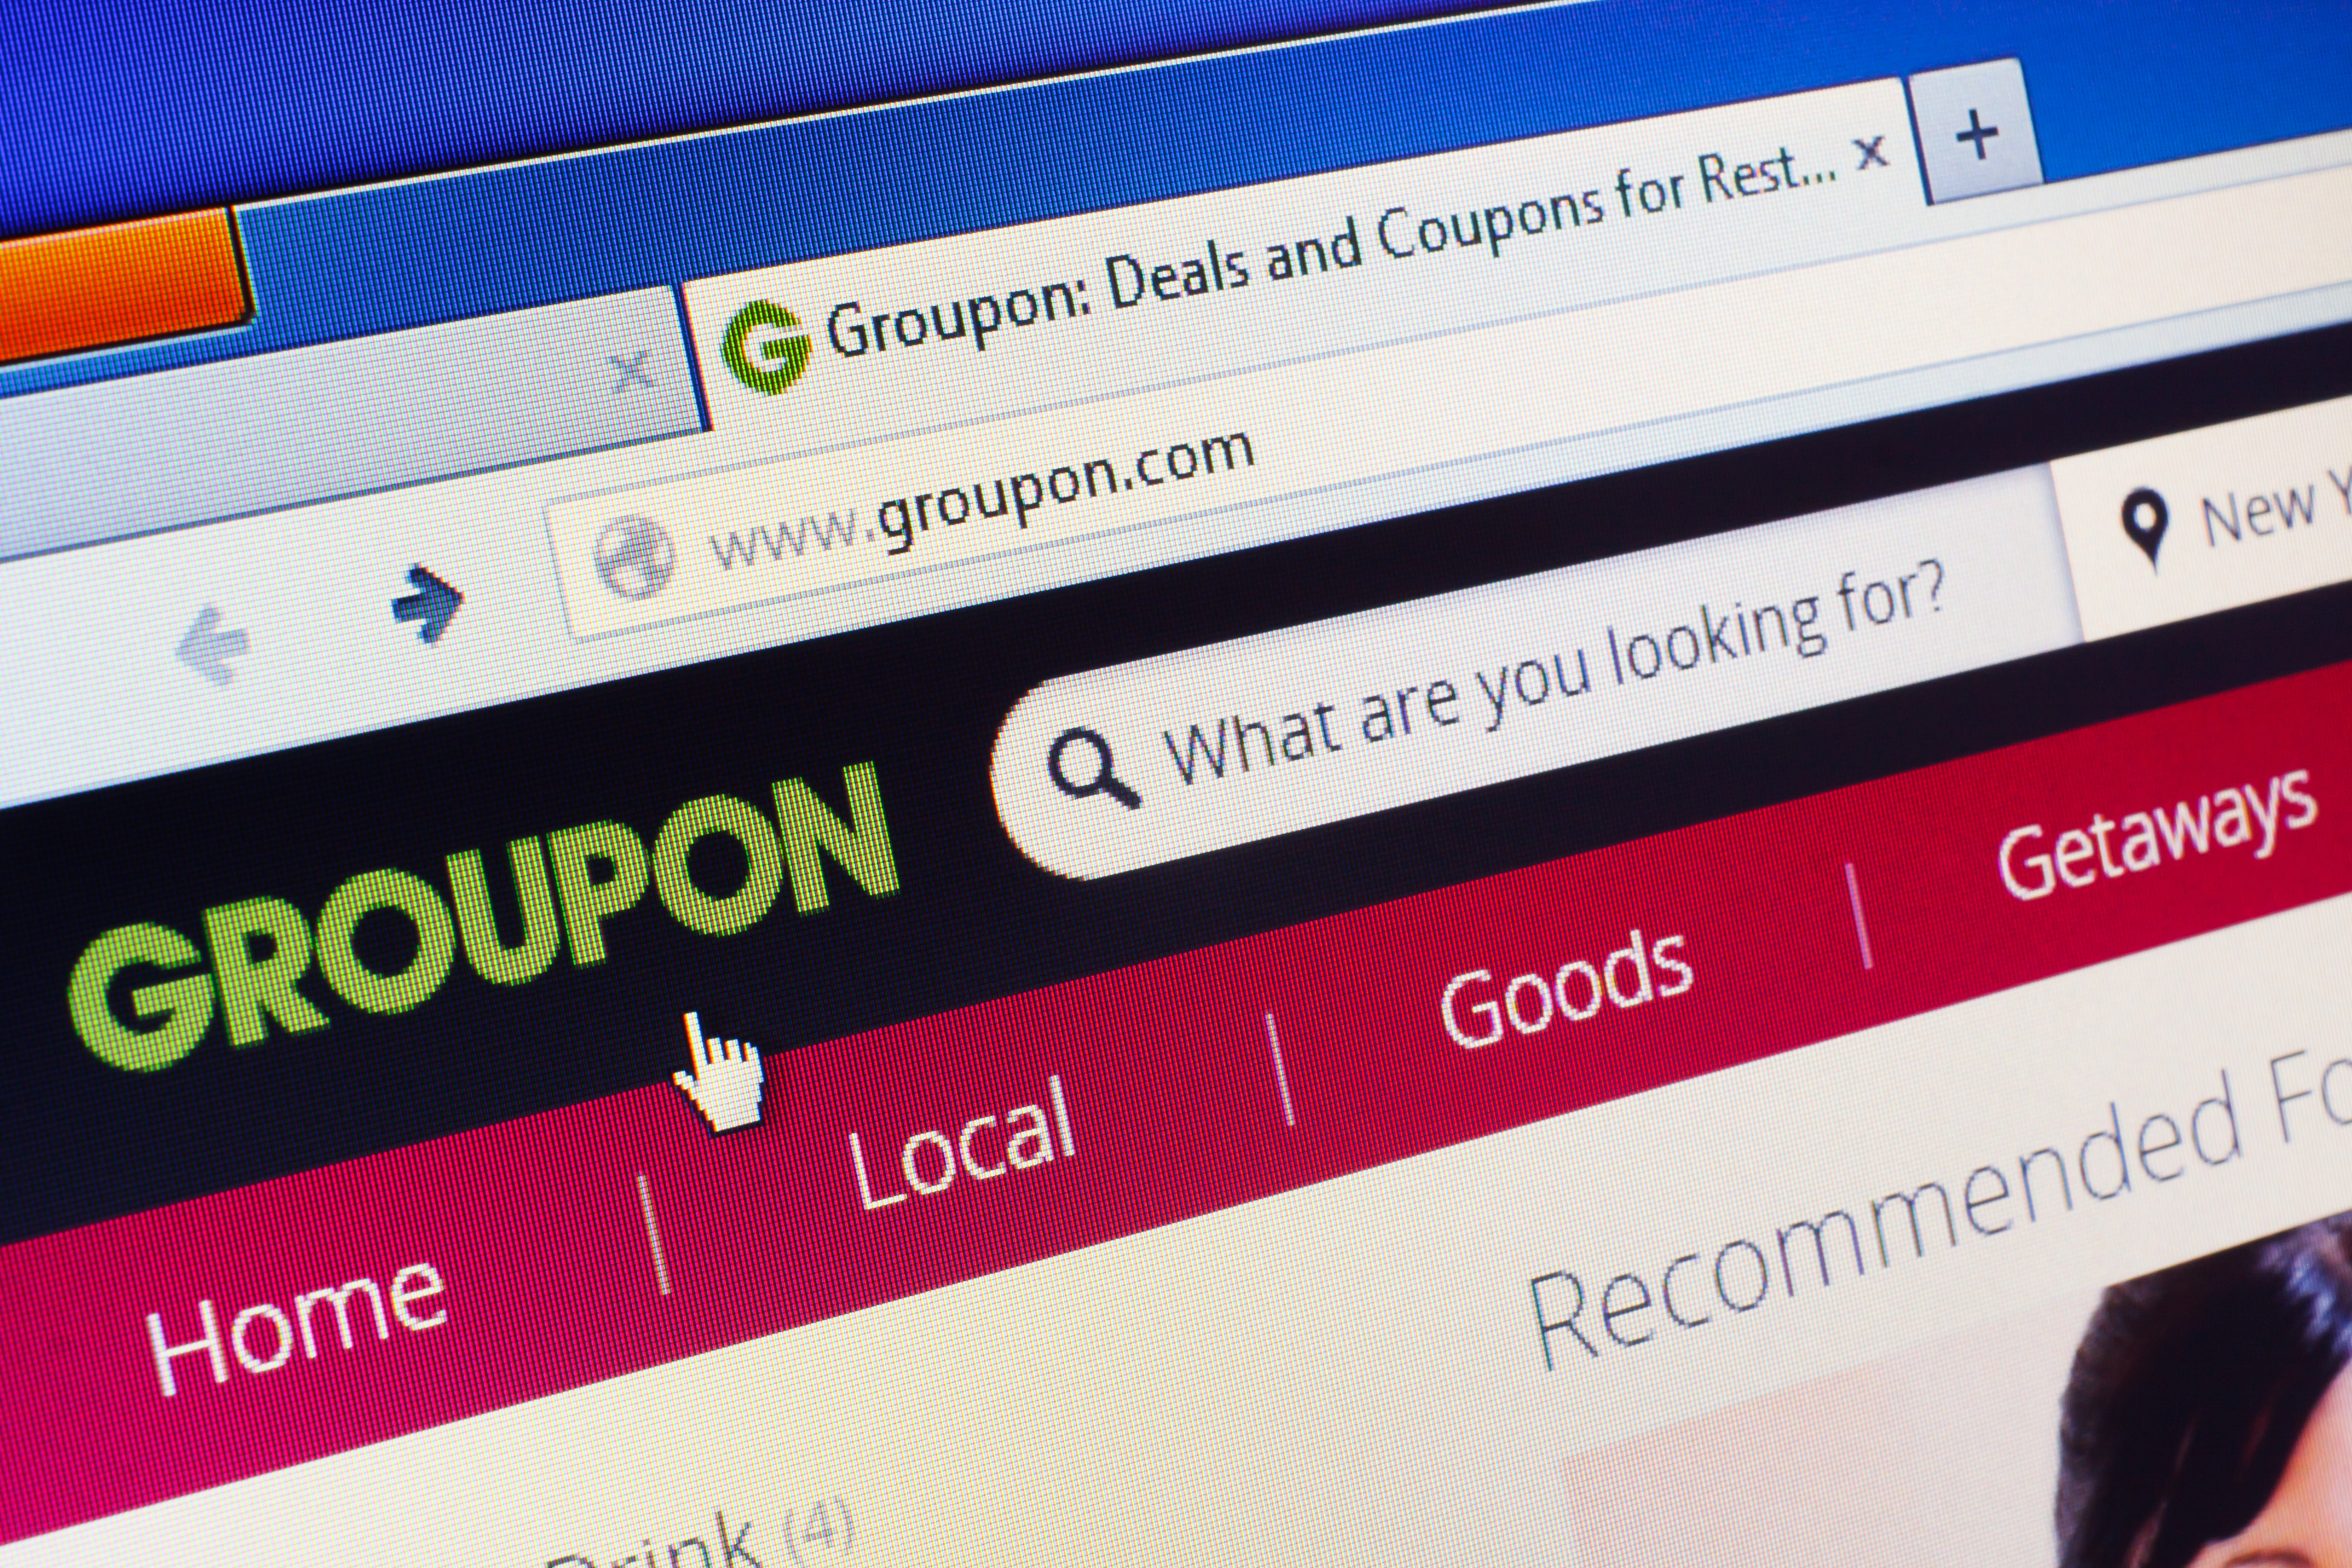 On May 10, 2023, Groupon is teasing strong Q1 earnings. Why is it important?